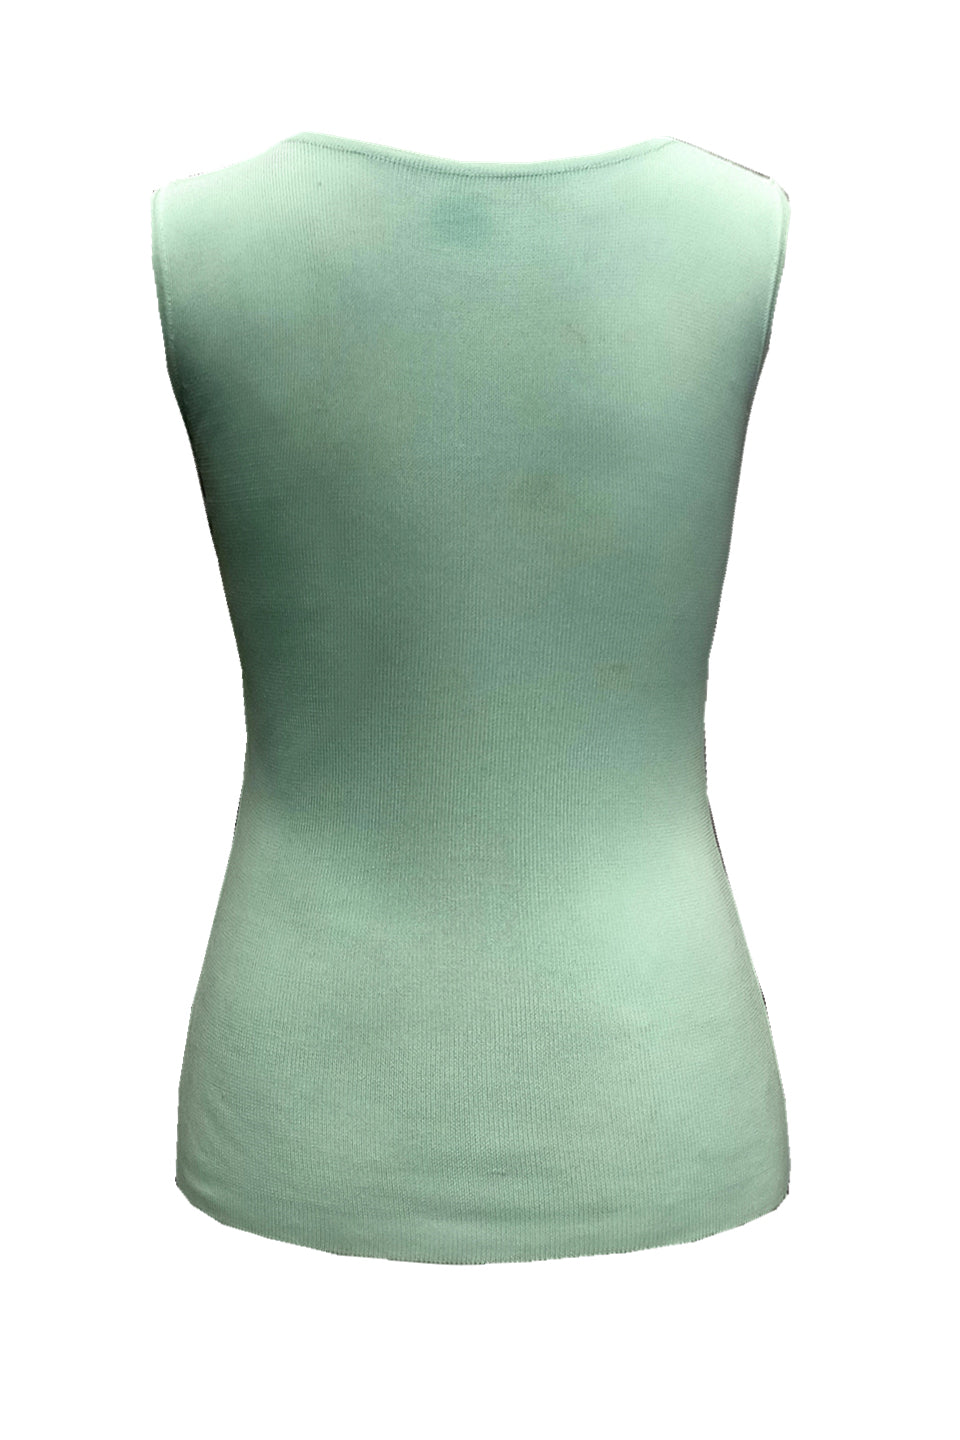 Journey sequined knit top in aqua blue